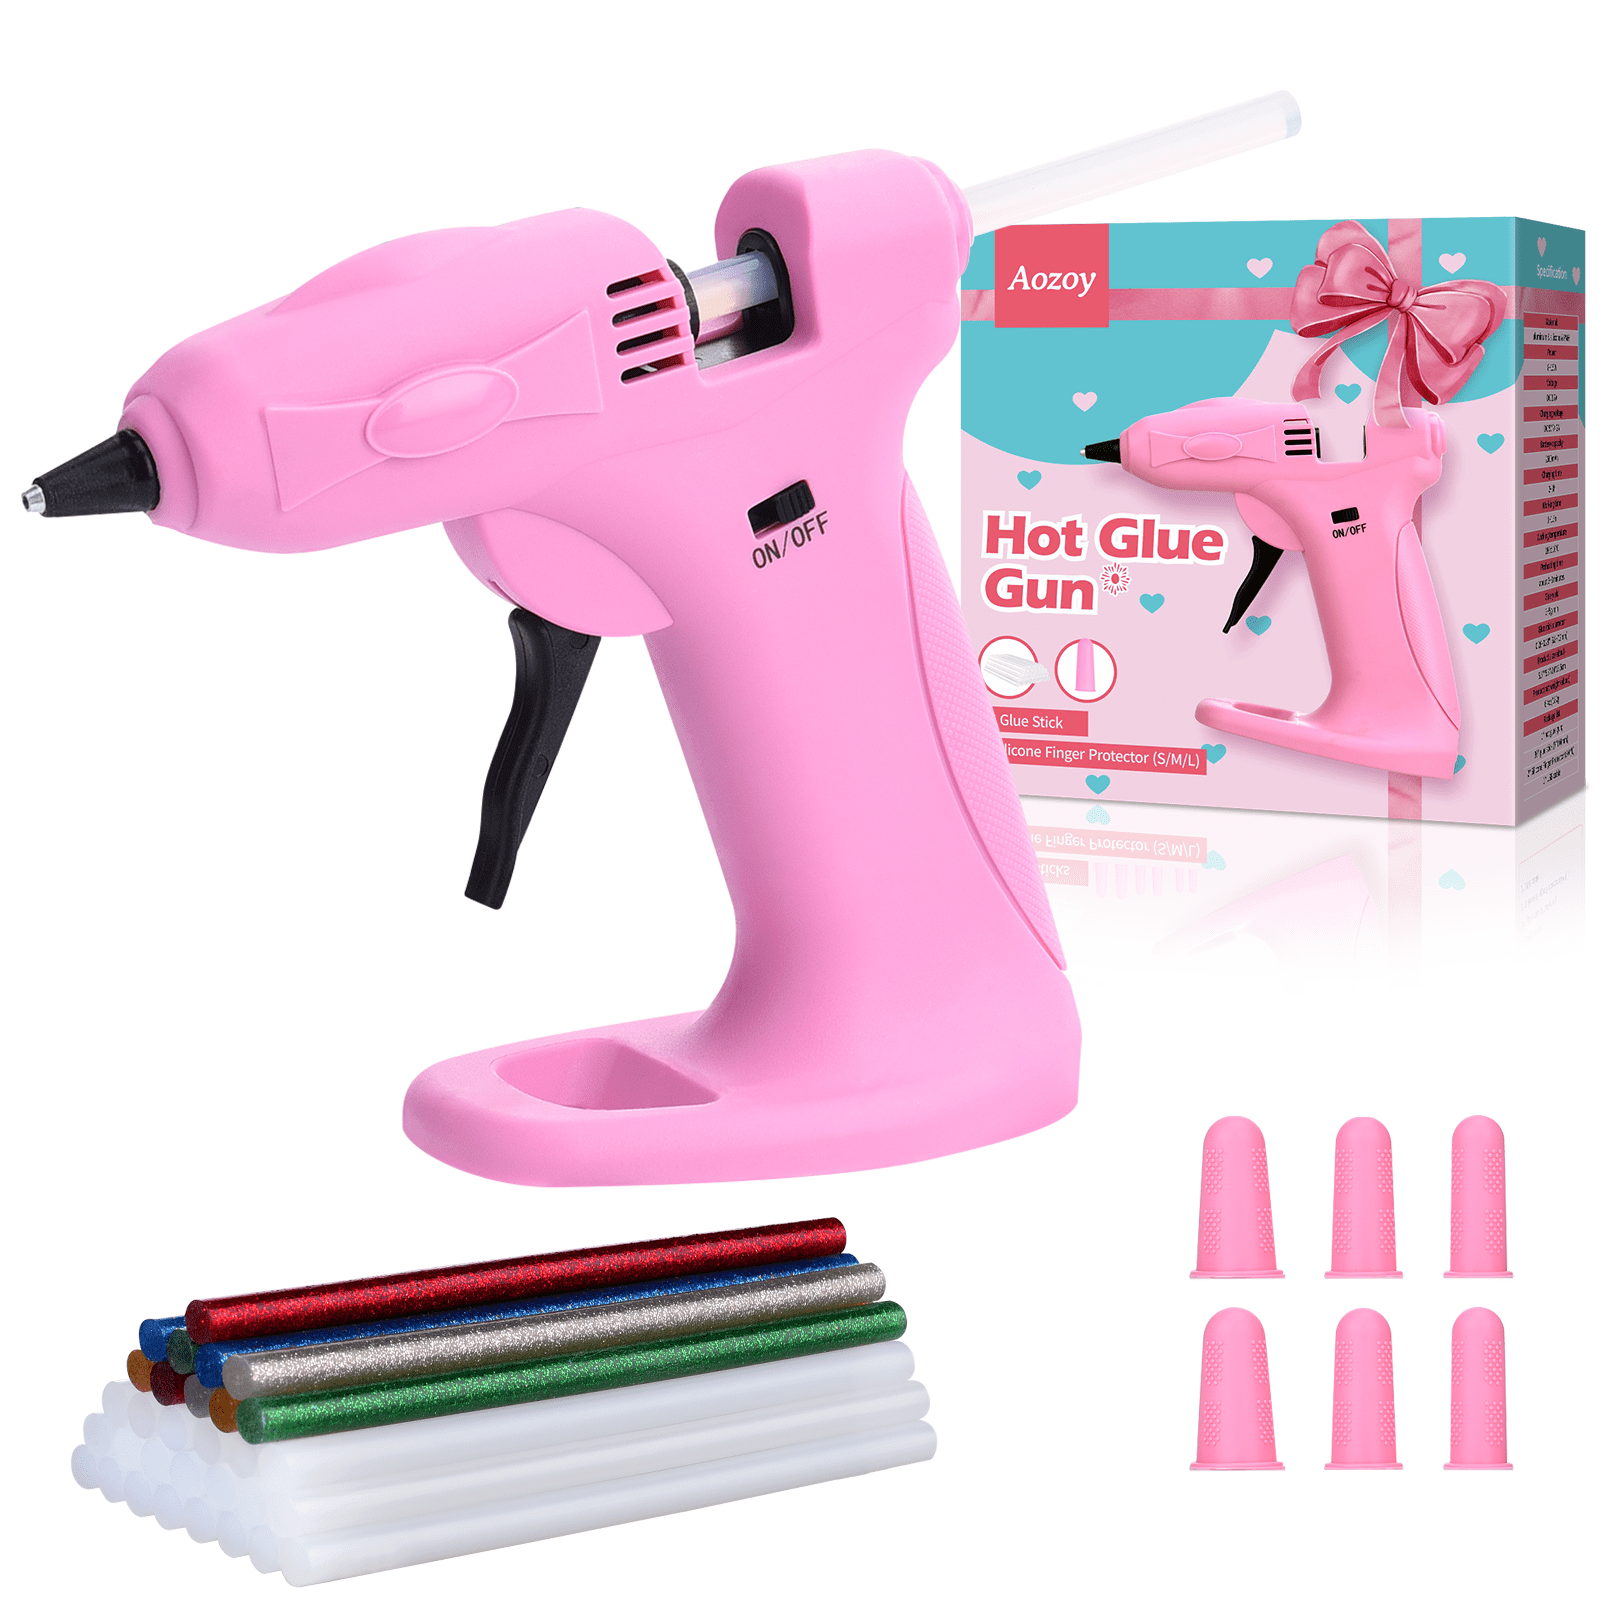 Covacure Hot Glue Gun Kit For Kids with 40 PCS Glue Sticks - Fast Heating &  Drip Proof Glue Gun with 3 Finger protectors & Base Stand, ideal for